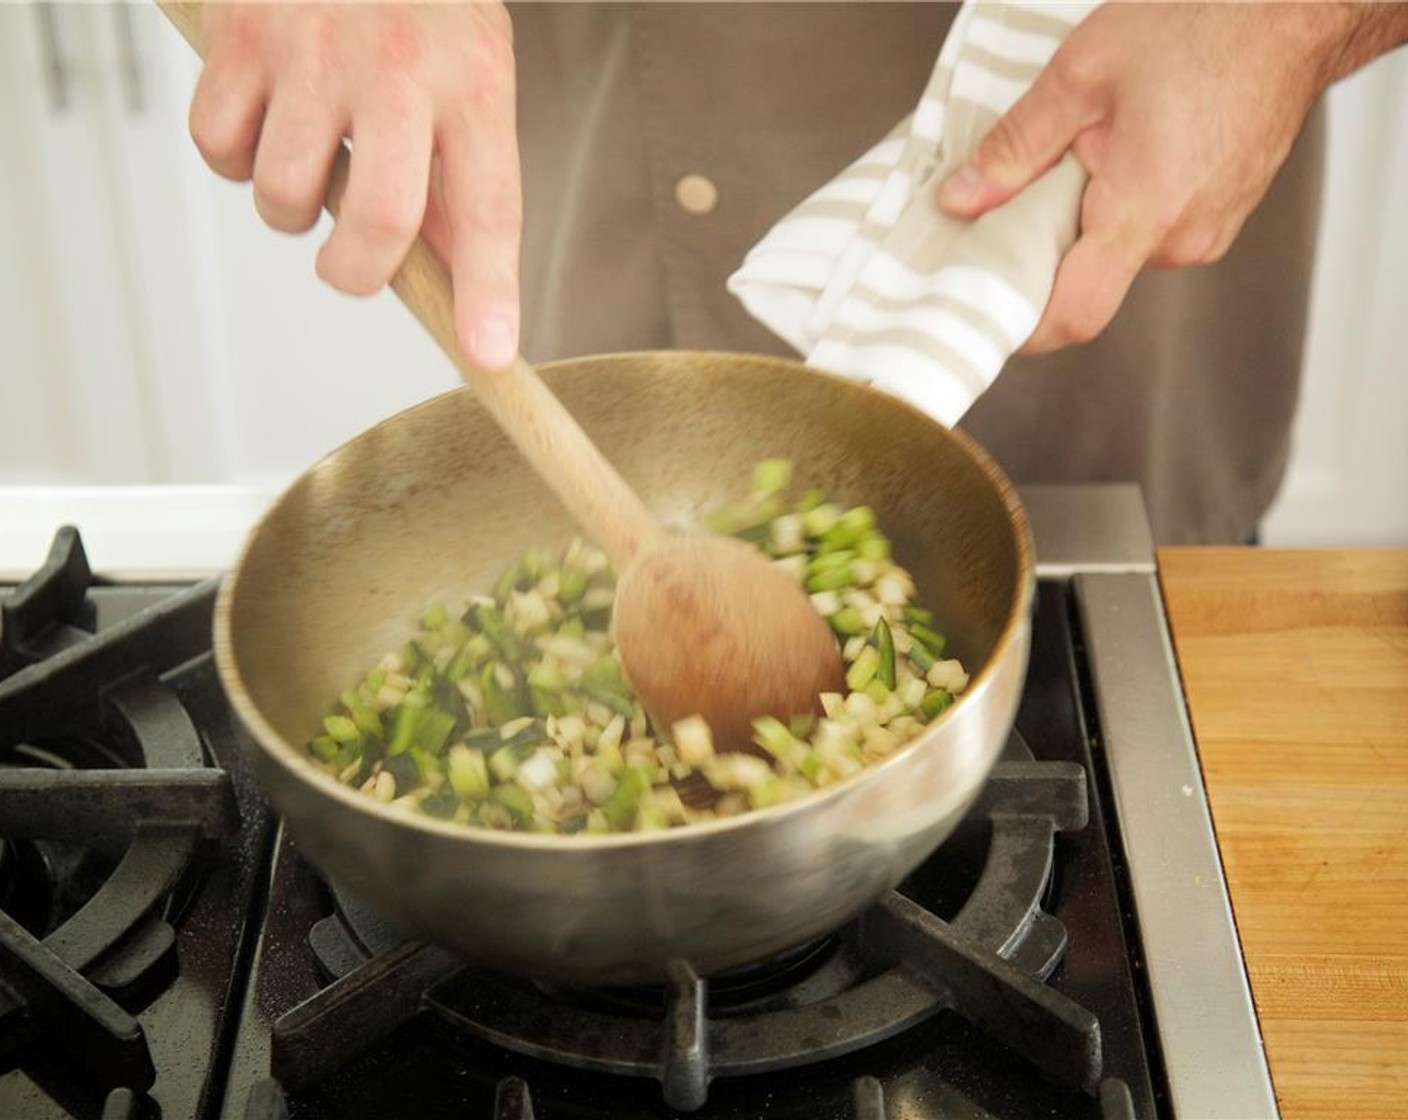 step 13 Add one tablespoon of olive oil to the same saute pan and heat over medium high heat. Add the onion, celery, pasilla pepper, and garlic to the pan. Stirring often, cook for five minutes until they caramelize.